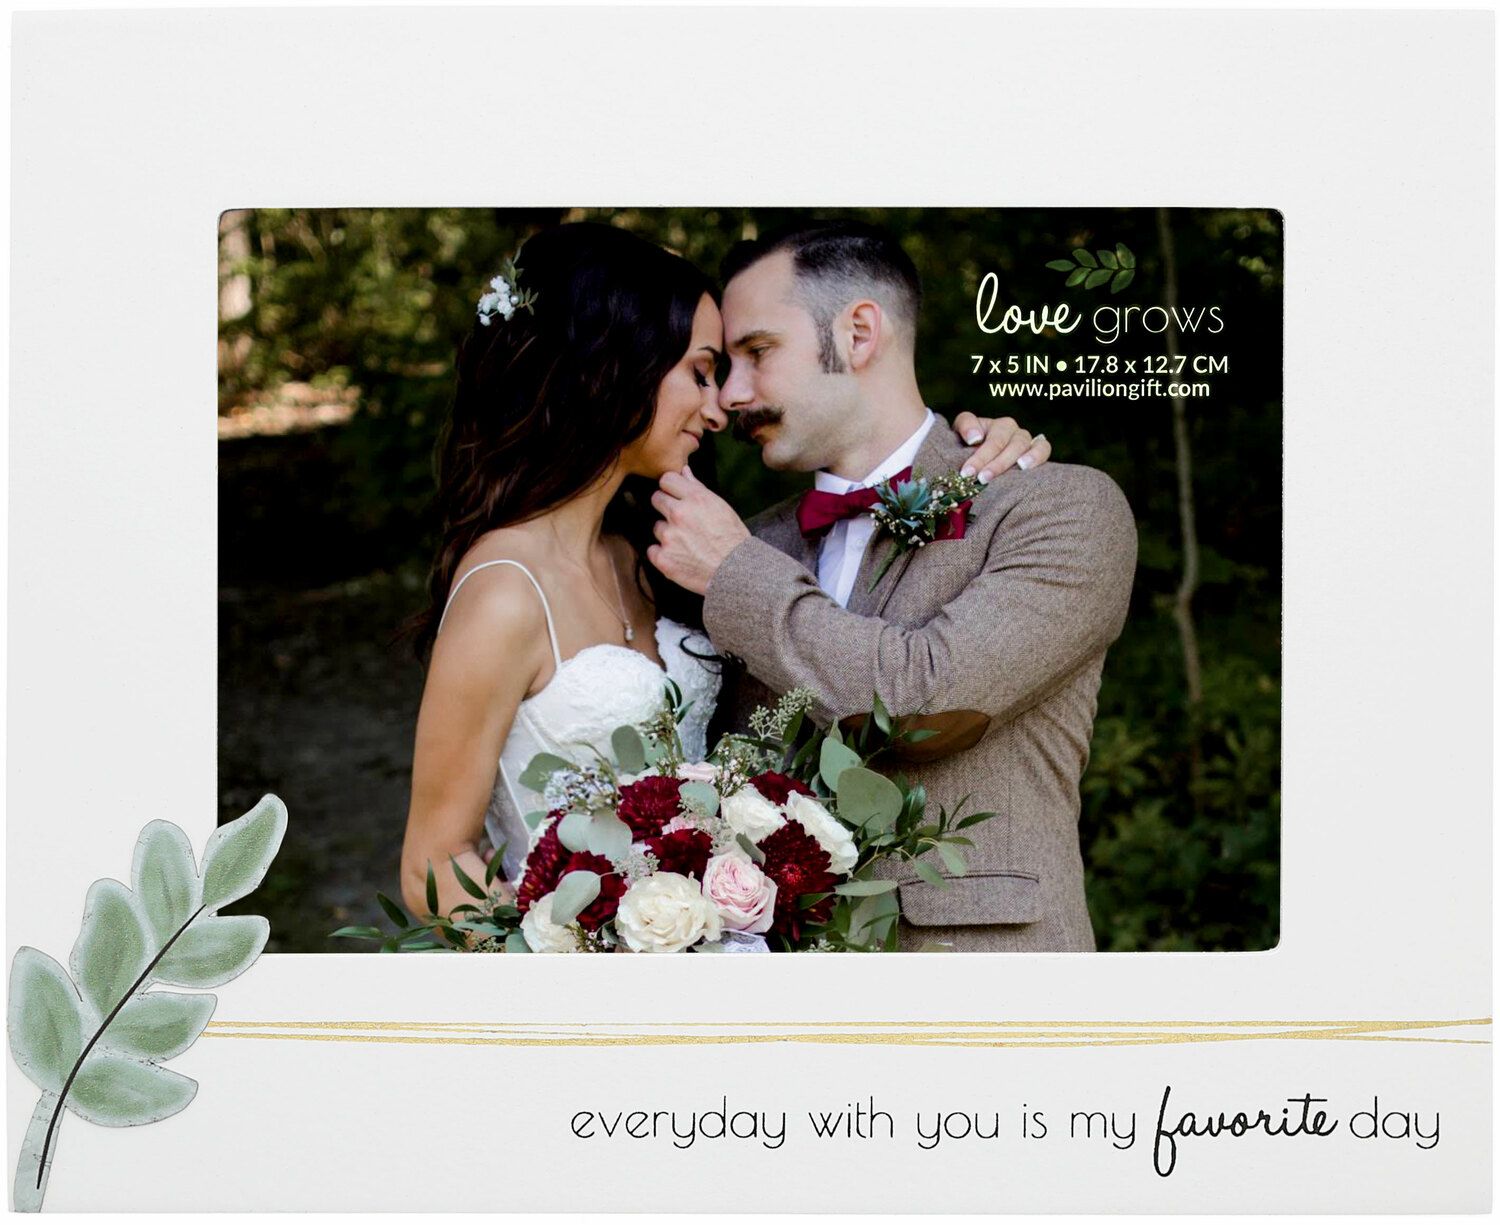 Favorite Day by Love Grows - Favorite Day - 9" x 7.25" MDF Frame
(Holds 5" x 7" Photo)